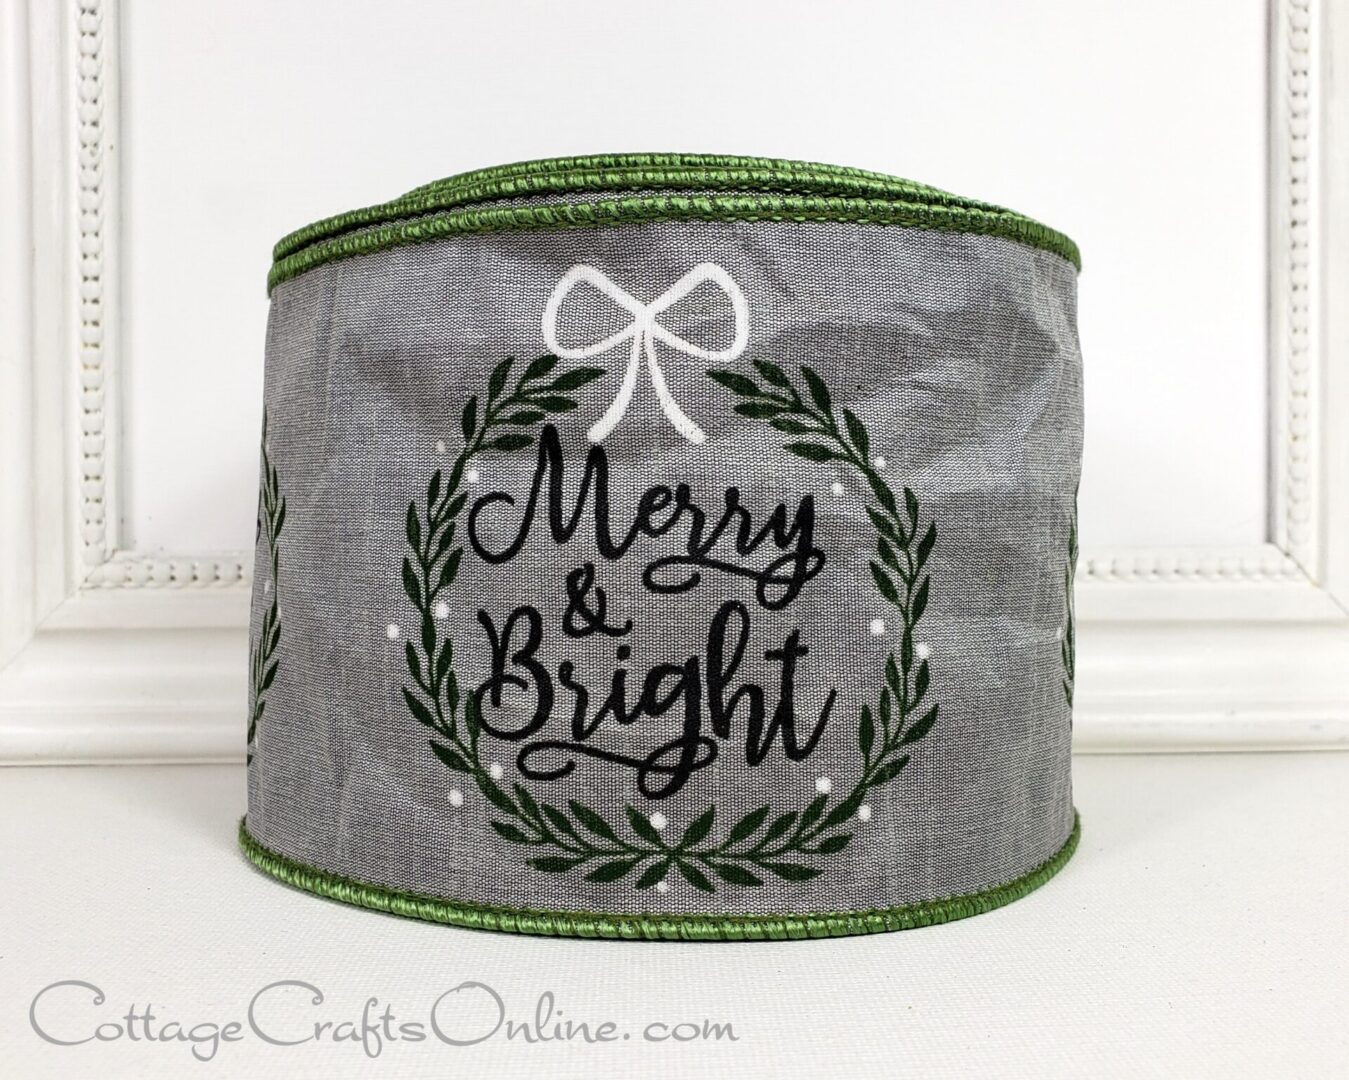 Merry & Bright script with wreath on silver grey 4" wide wired ribbon from the Etsy shop of Cottage Crafts Online.